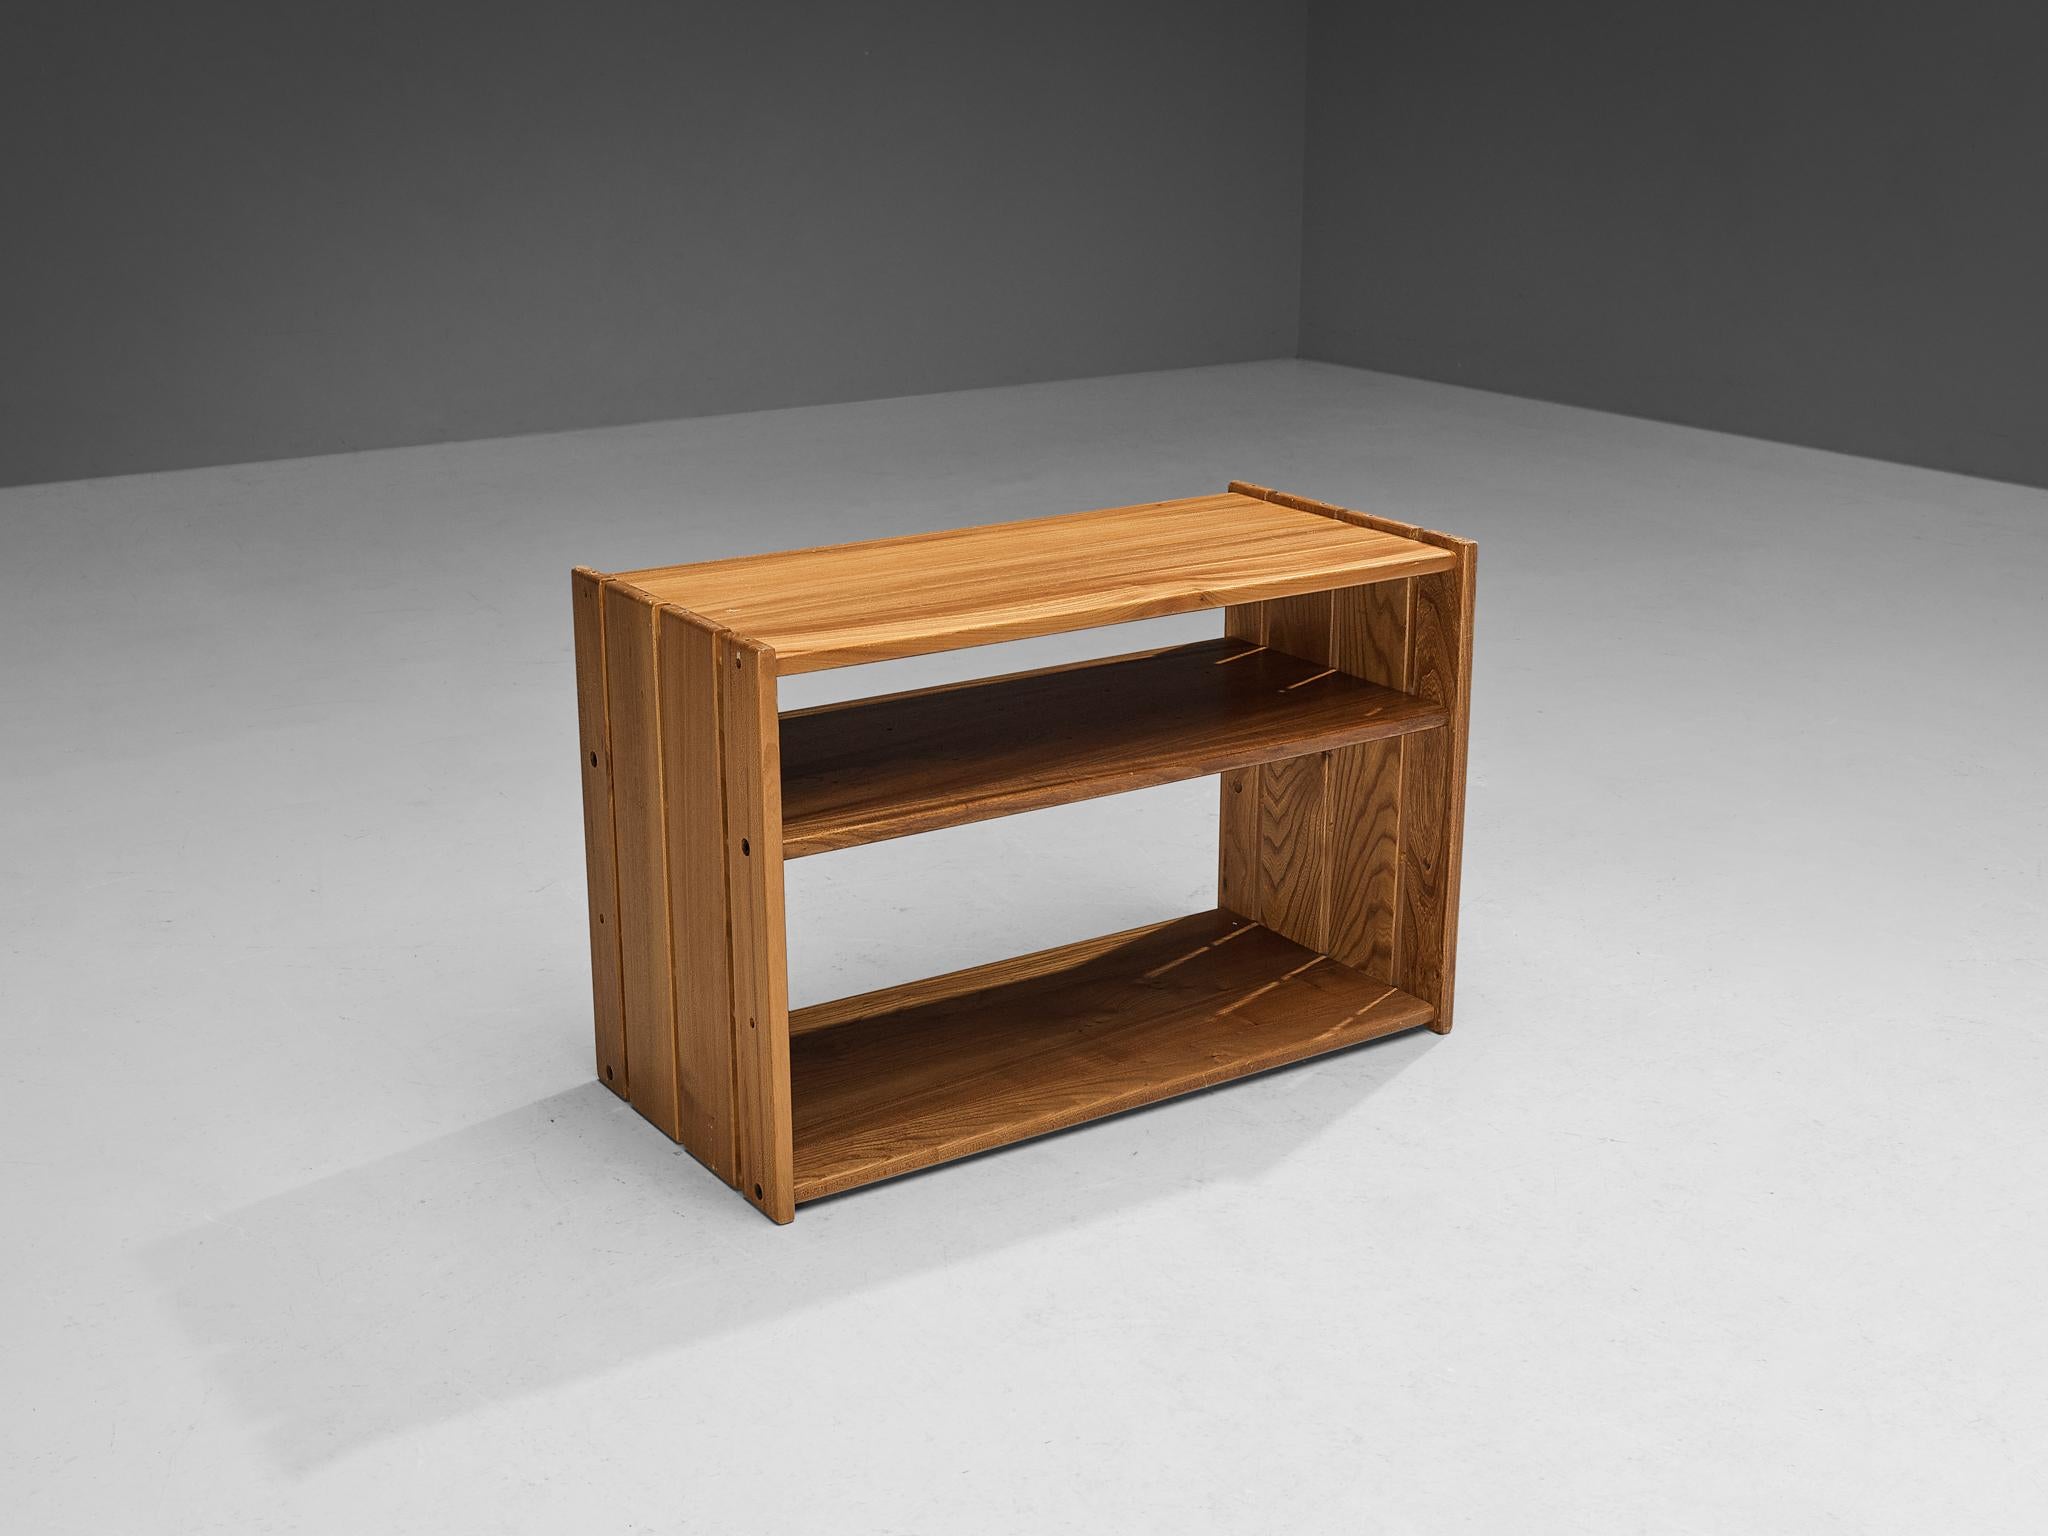 Maison Regain, etarage / shelf cabinet, elm, France, 1960s

This cabinet in elm combines a simplified yet complex design with nifty, solid construction details that characterize Maison Regain's designs. The open and clean construction allows the